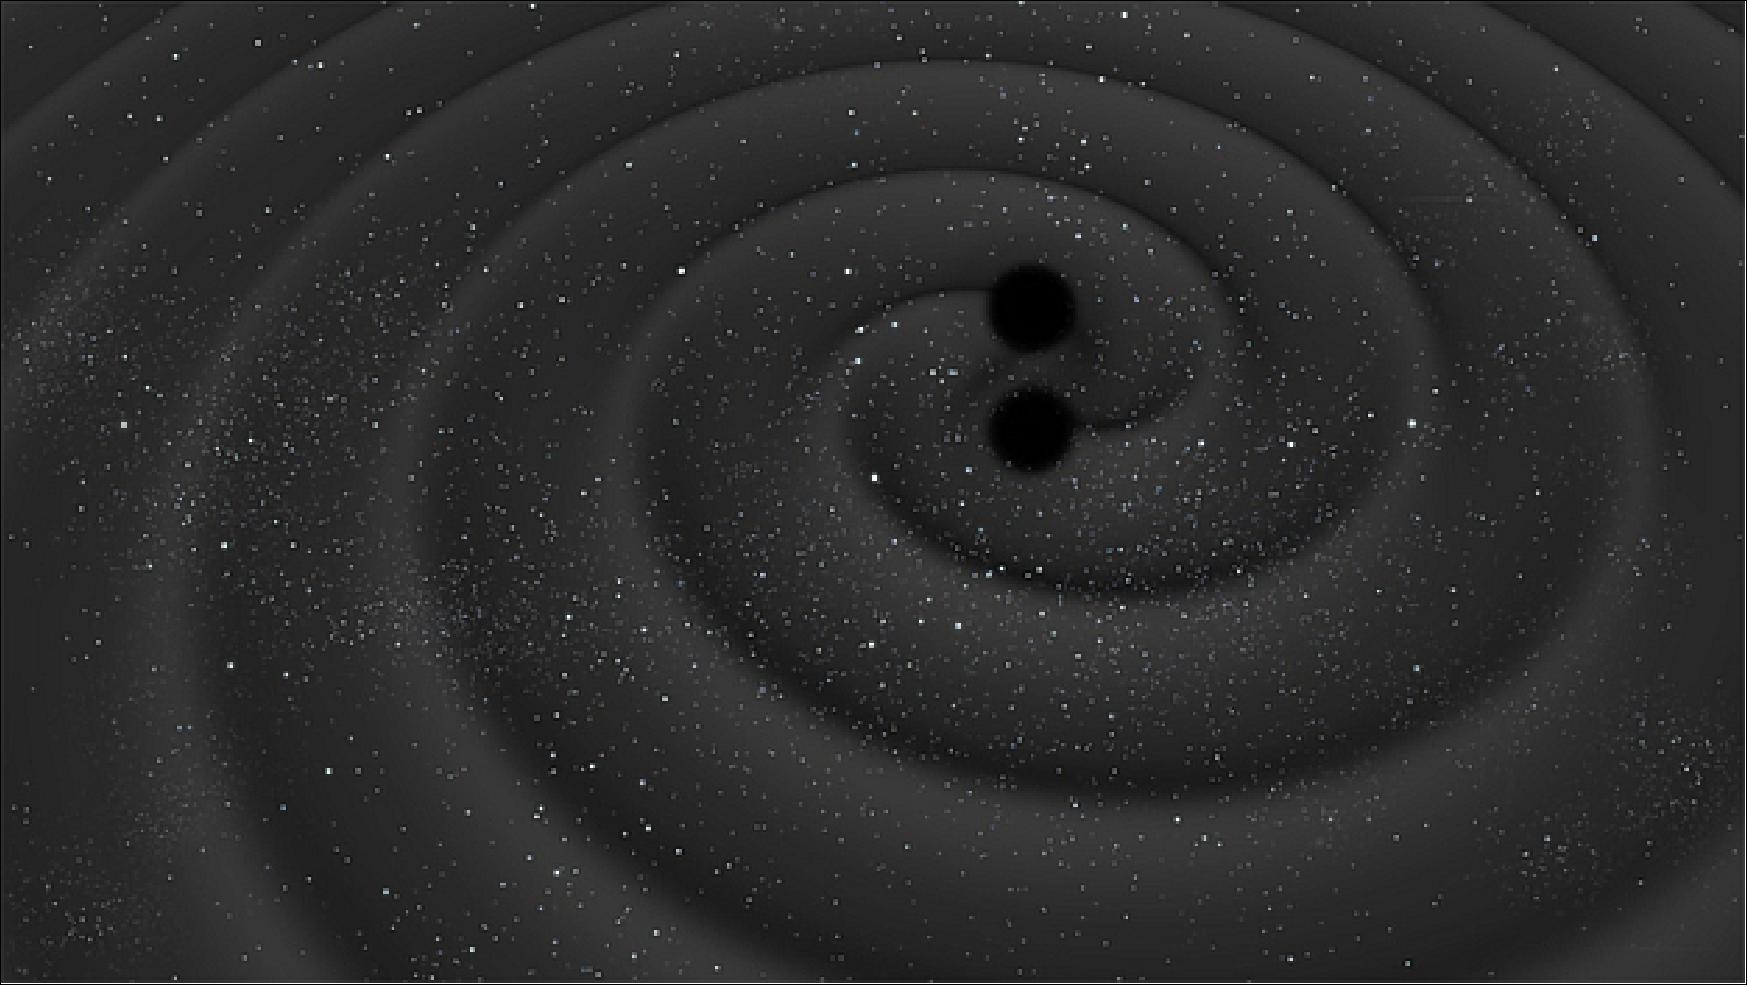 Figure 1: Artist's impression of two black holes as they spiral towards each other before merging, releasing gravitational waves – fluctuations in the fabric of spacetime (image credit: ESA–C. Carreau) 2)